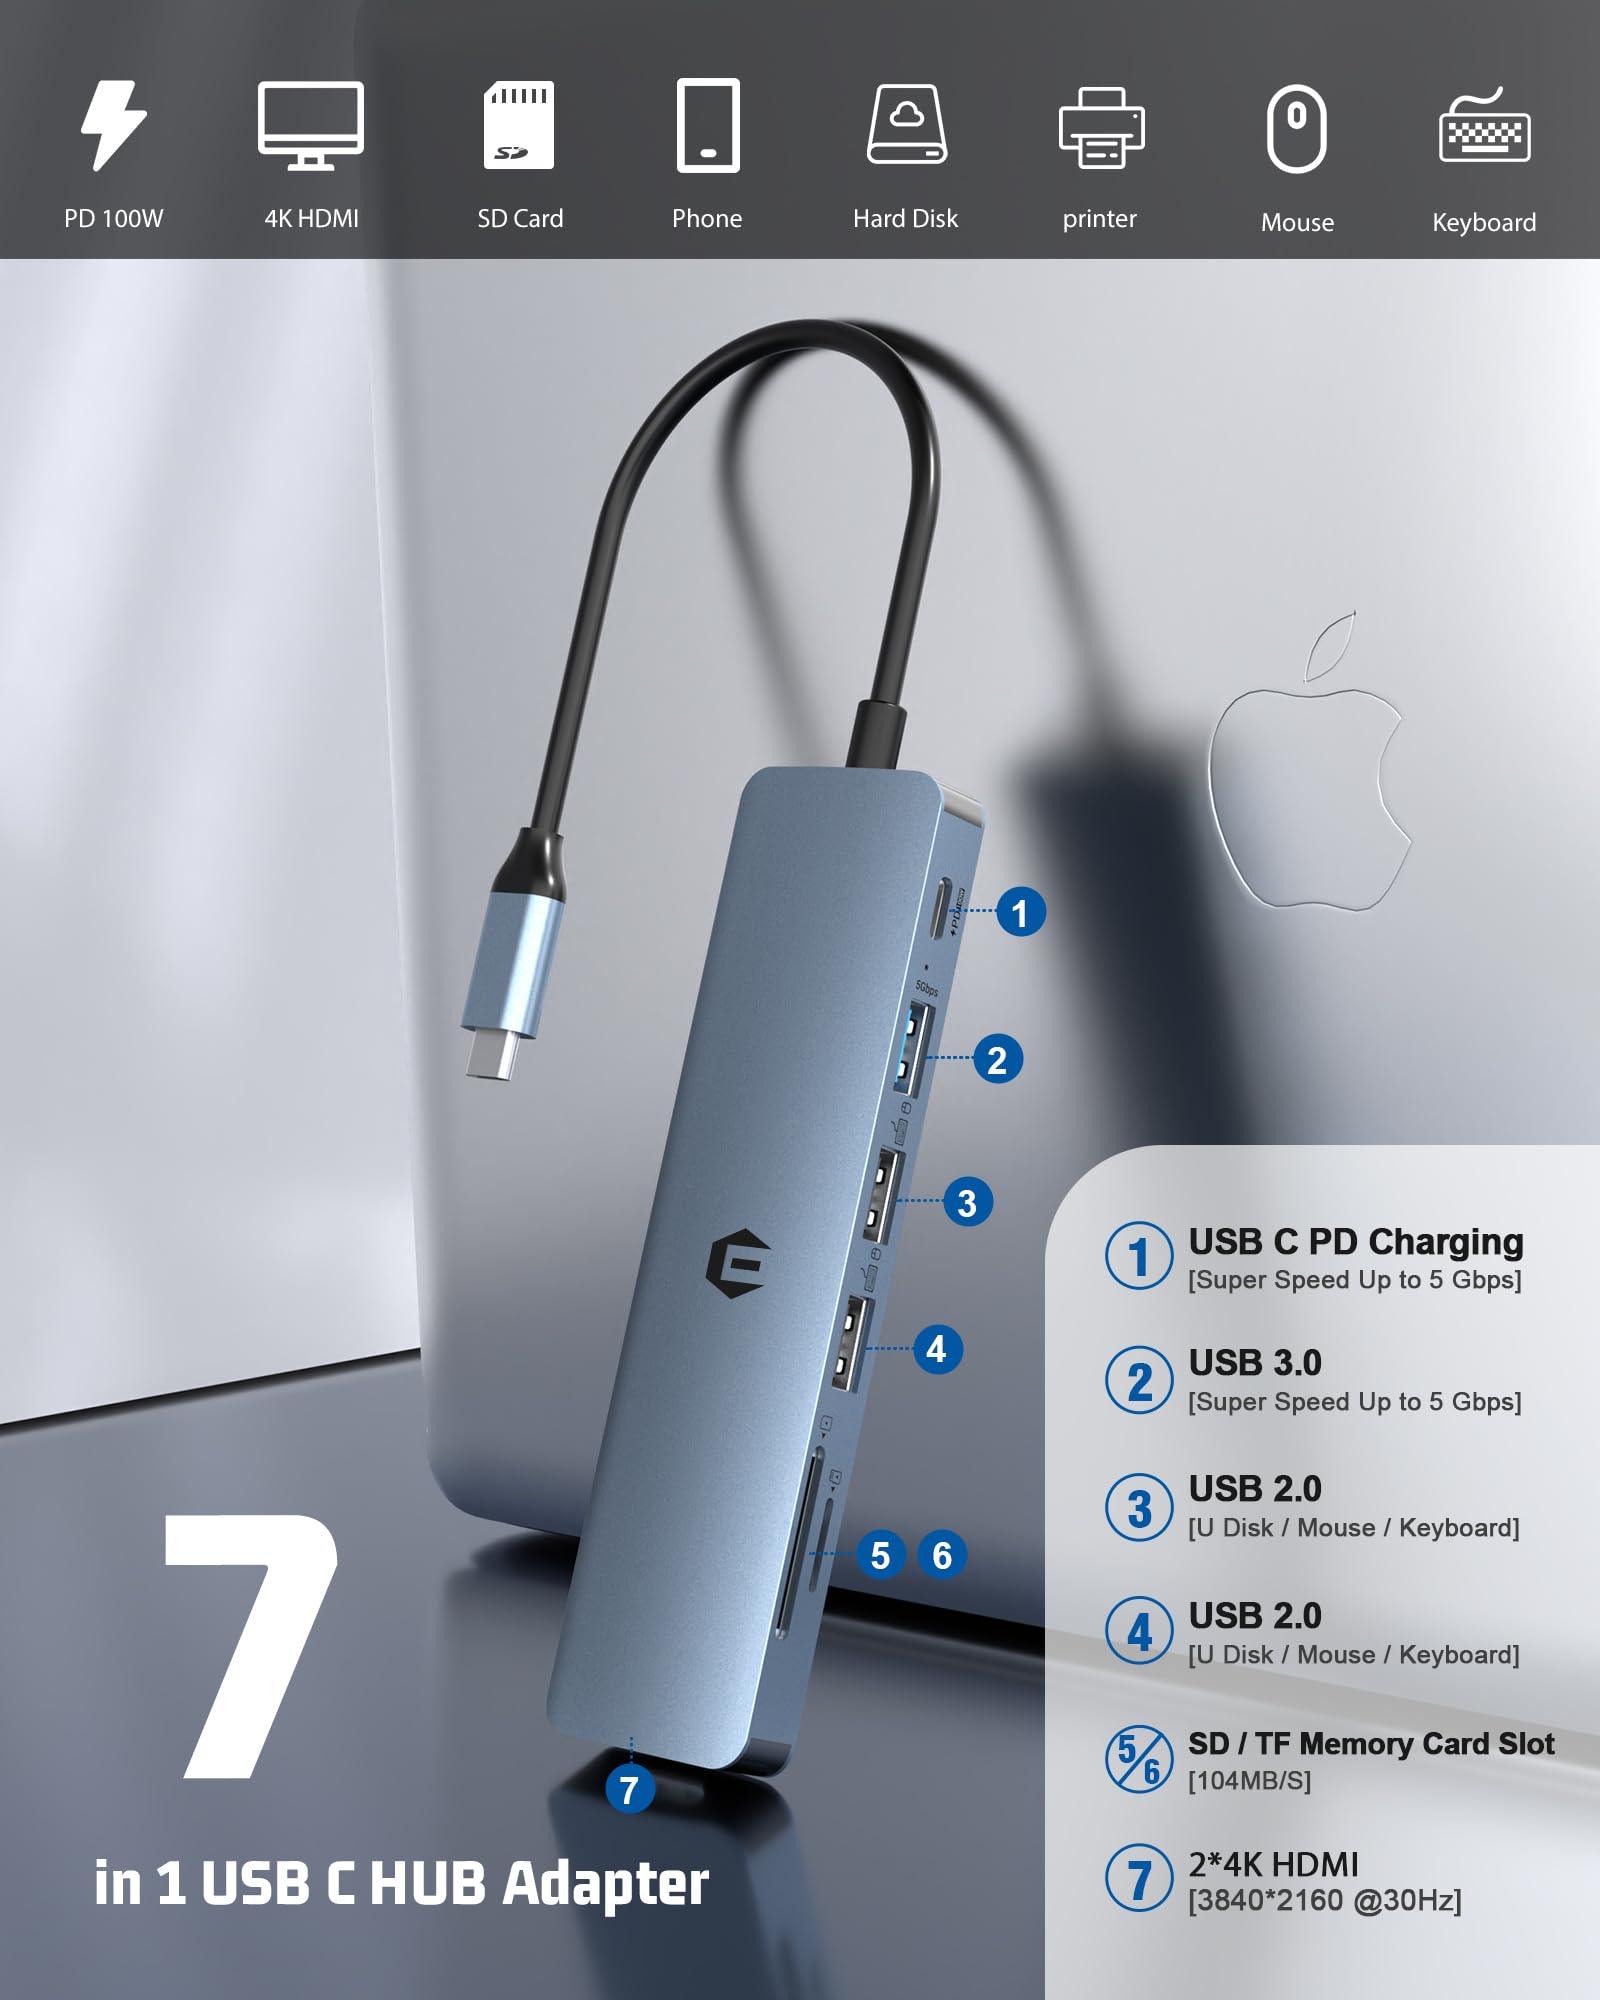 7 in 1 USB C Hub, Unlock New Possibilities with The oditton USB Adapter, offering 4K HDMI, 100W PD, USB 3.0 Ports, 2 x USB 2.0 Ports and an SD/TF Card Reader